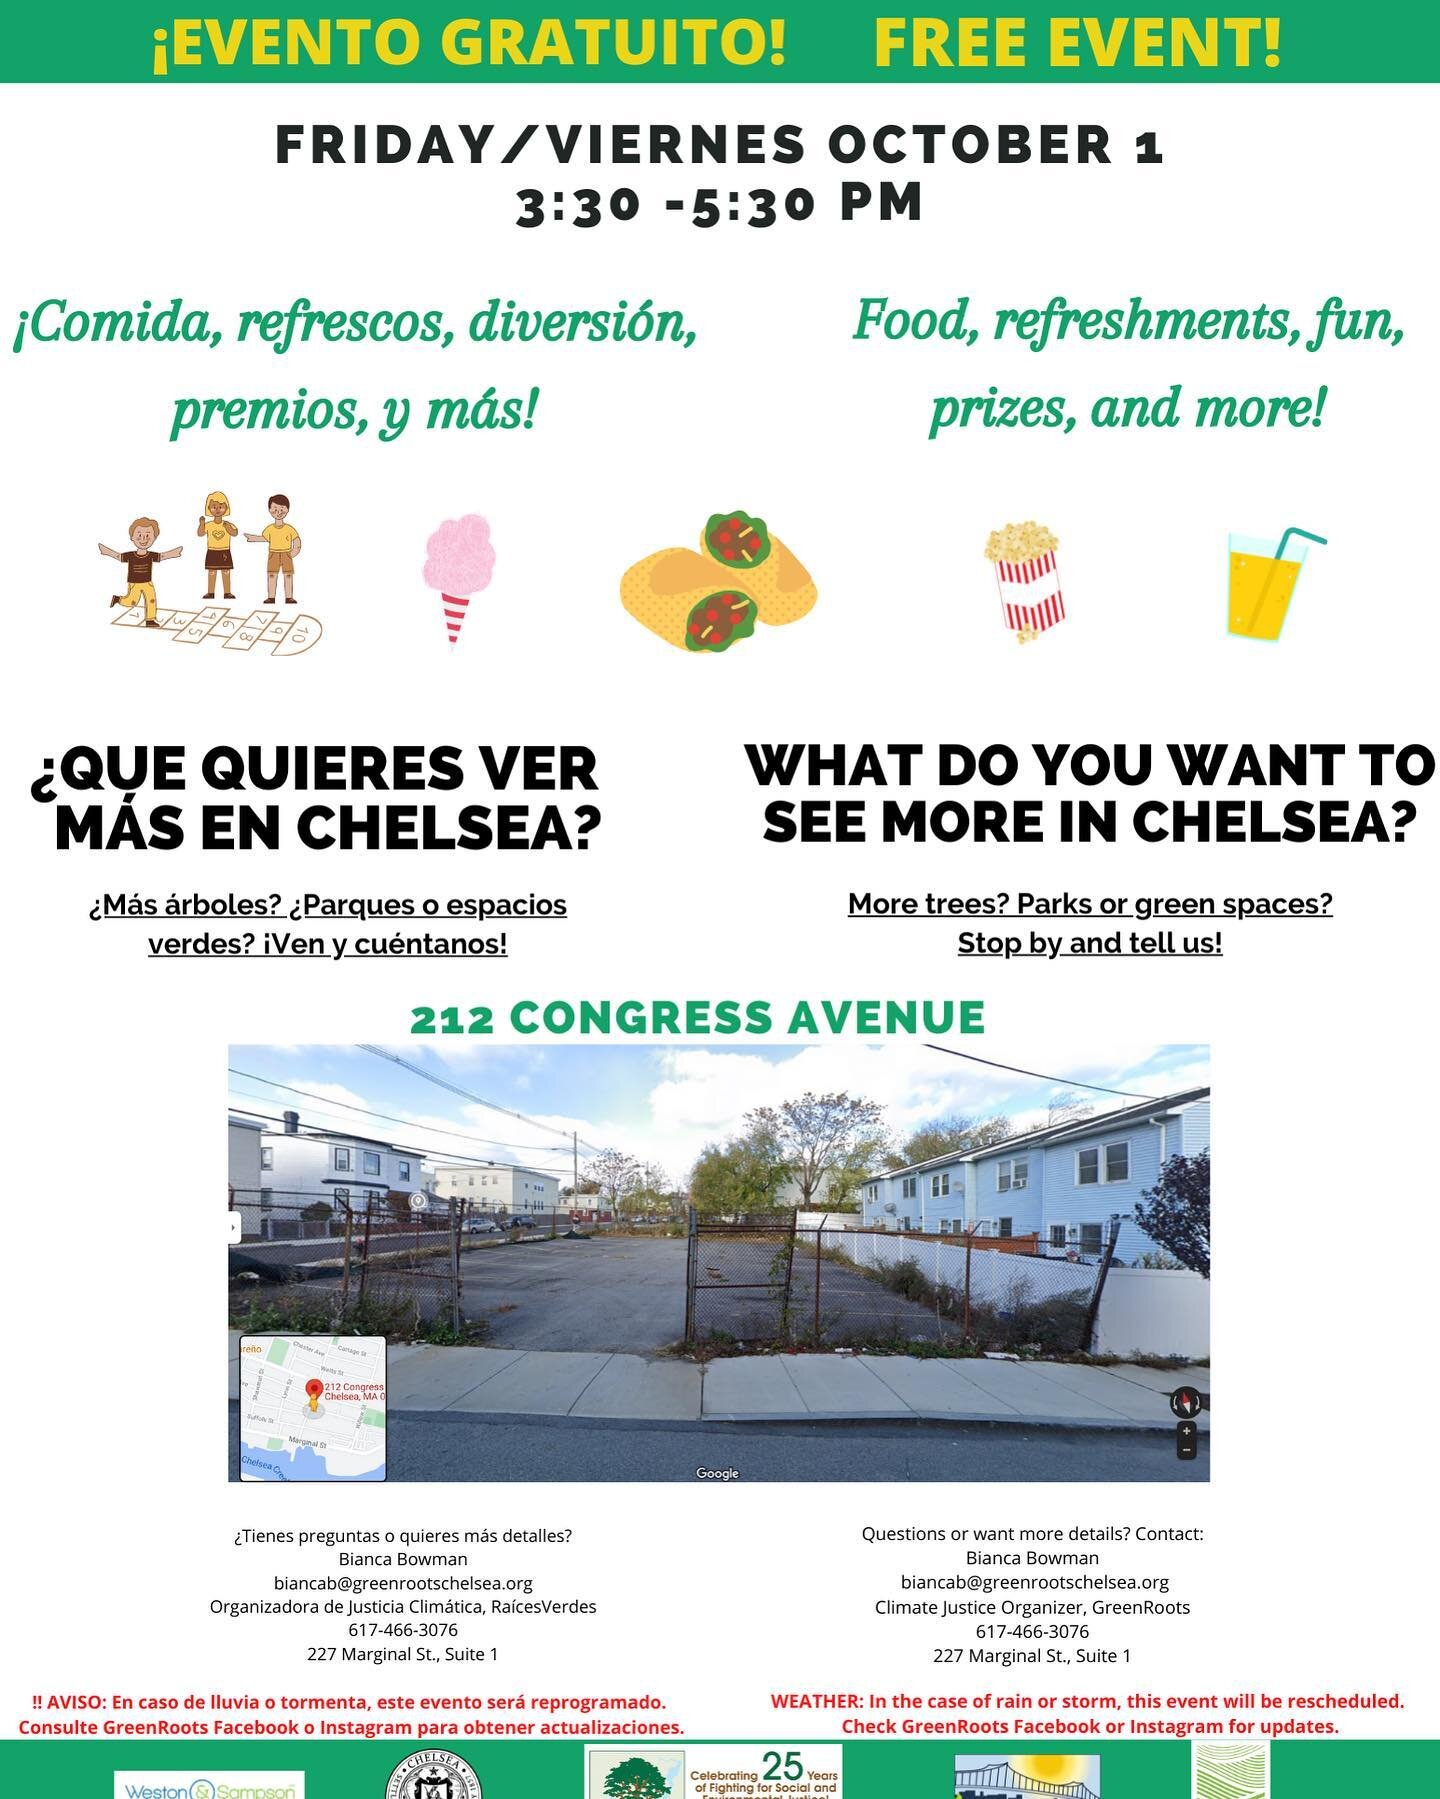 Rainy-day reschedule! This event has been rescheduled  to next Friday, Oct 1. Hope to see you there! #climate #cool #food #chelseamassachusetts #chelseamass #chelseama #eco #greenrootschelsea #heatwave #climatechange #greenspace